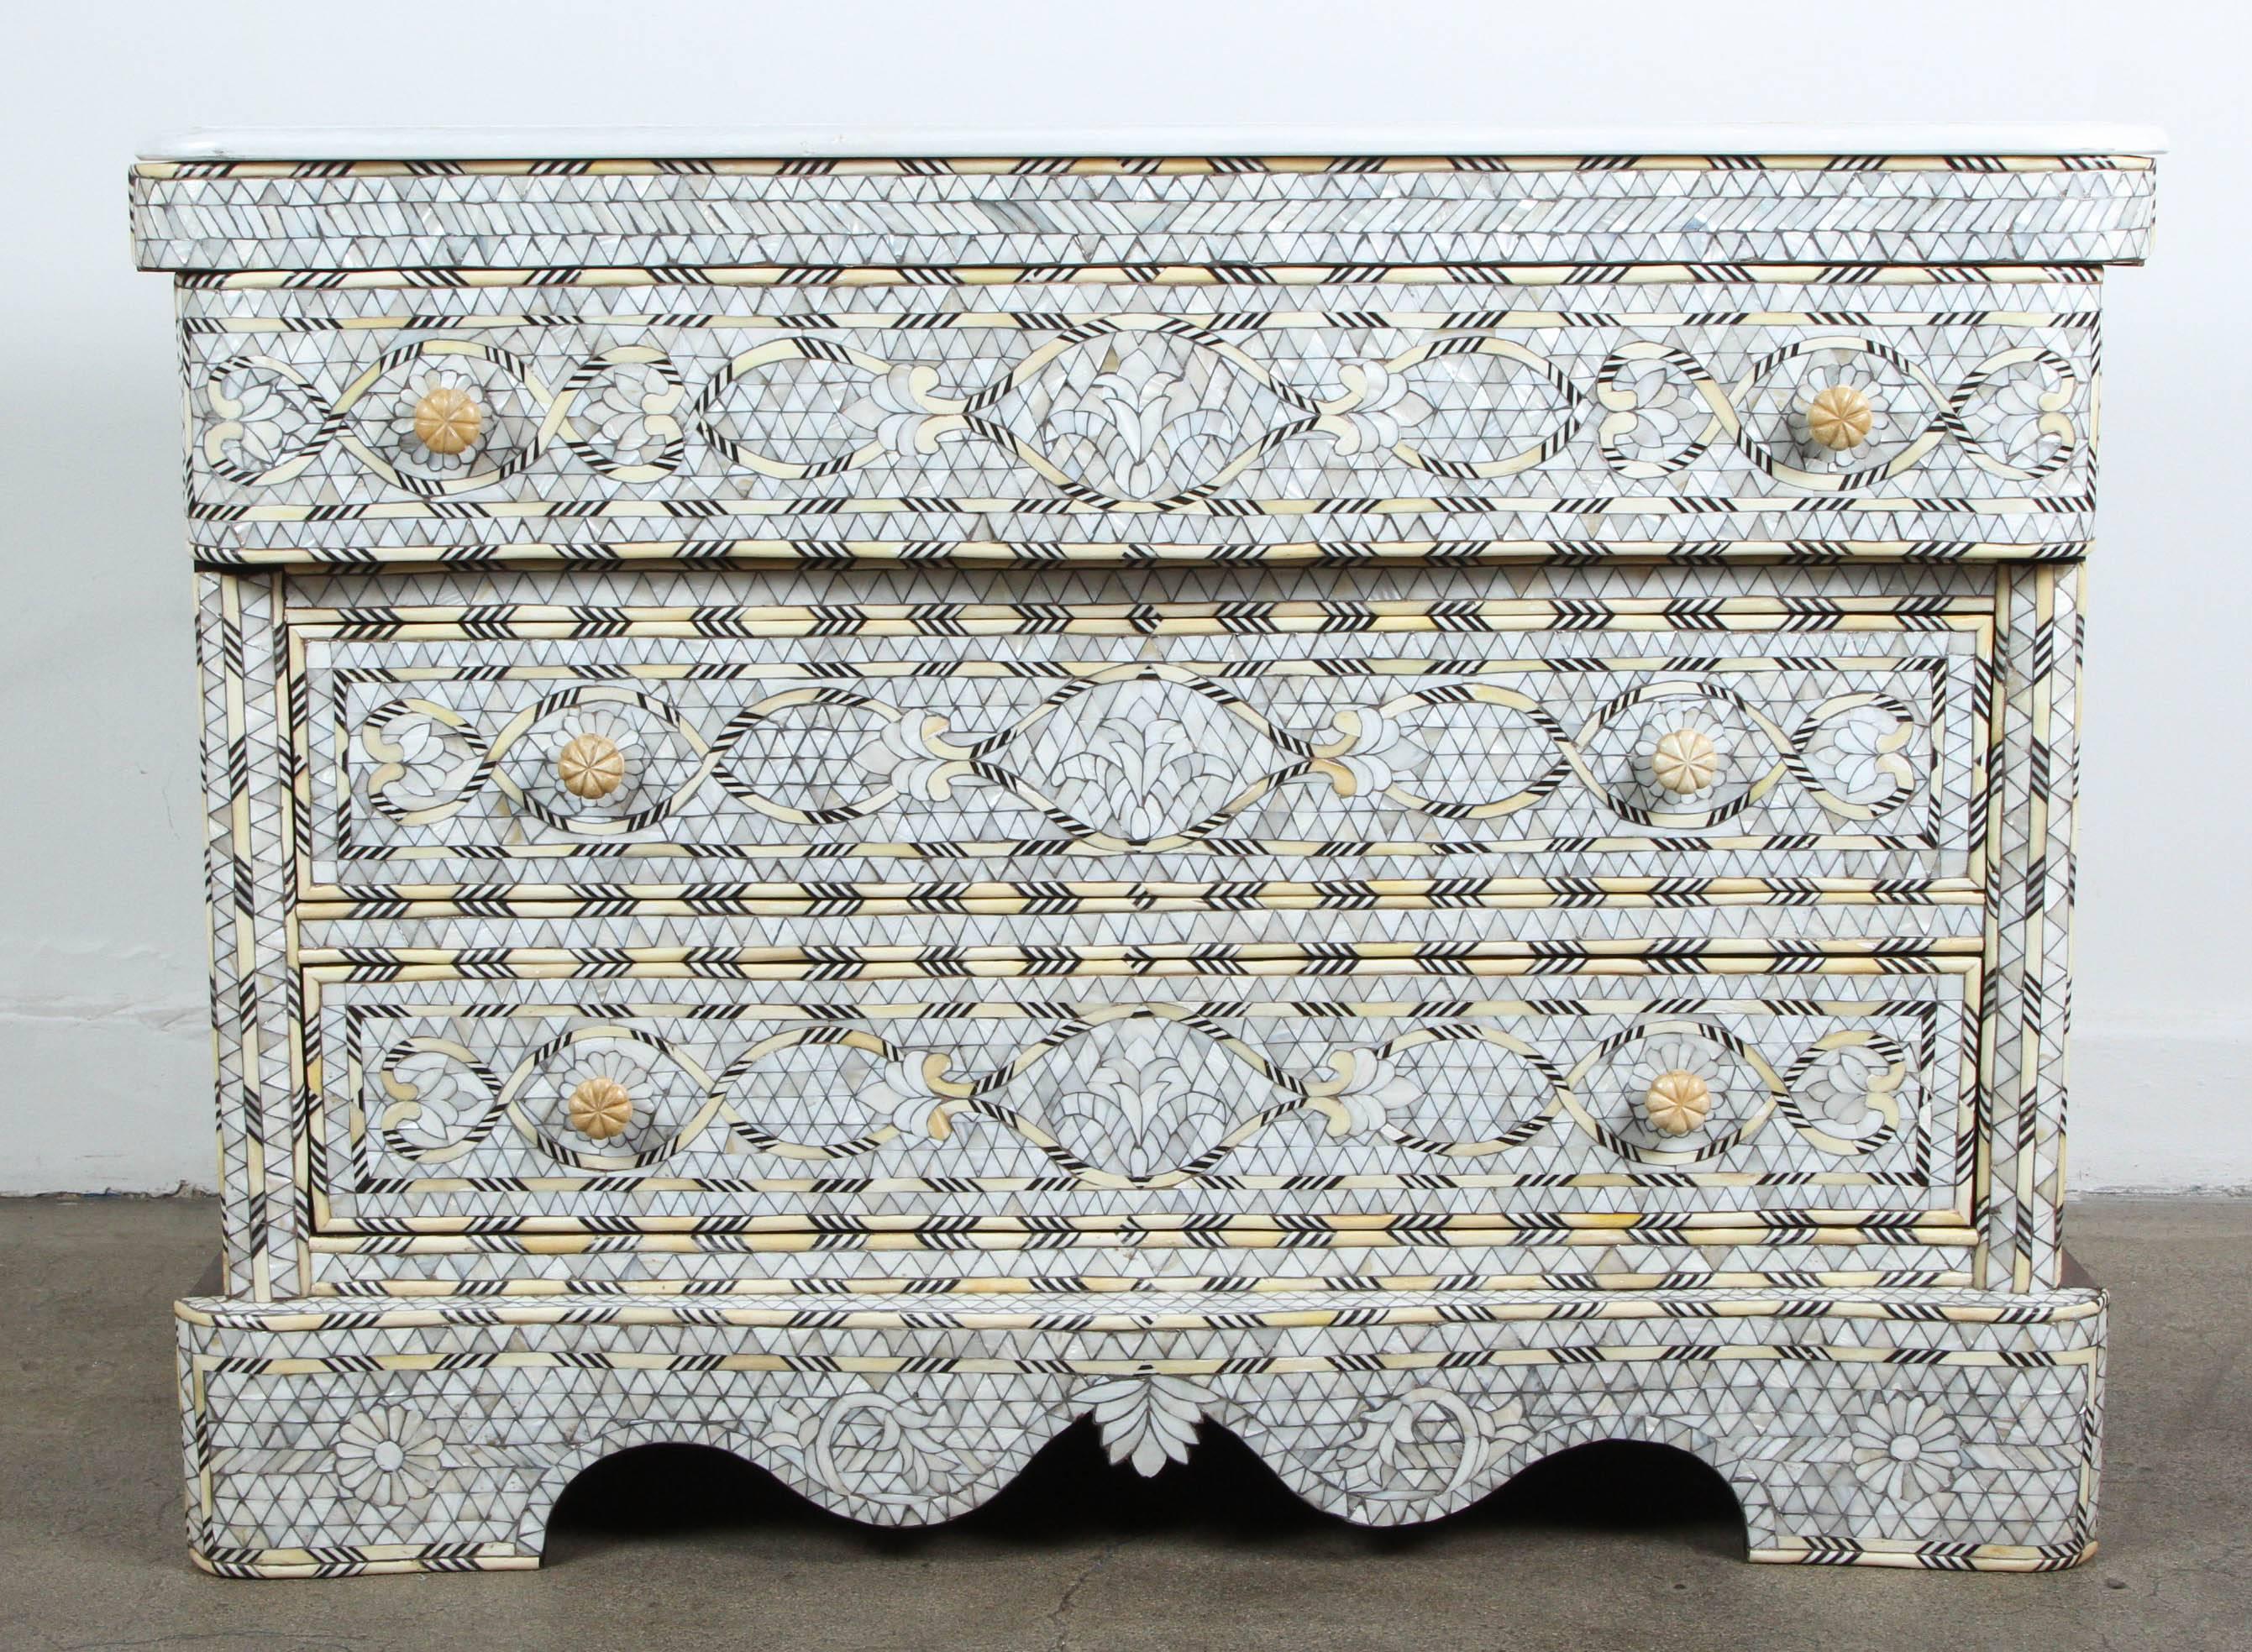 Fabulous pair of Middle Eastern Syrian artwork, handcrafted white wedding dresser with three drawers, wood inlay with mother-of-pearl, shell, ebony and bone.
Moorish arches and intricate Islamic designs.
Dowry chest of drawers heavily inlaid in